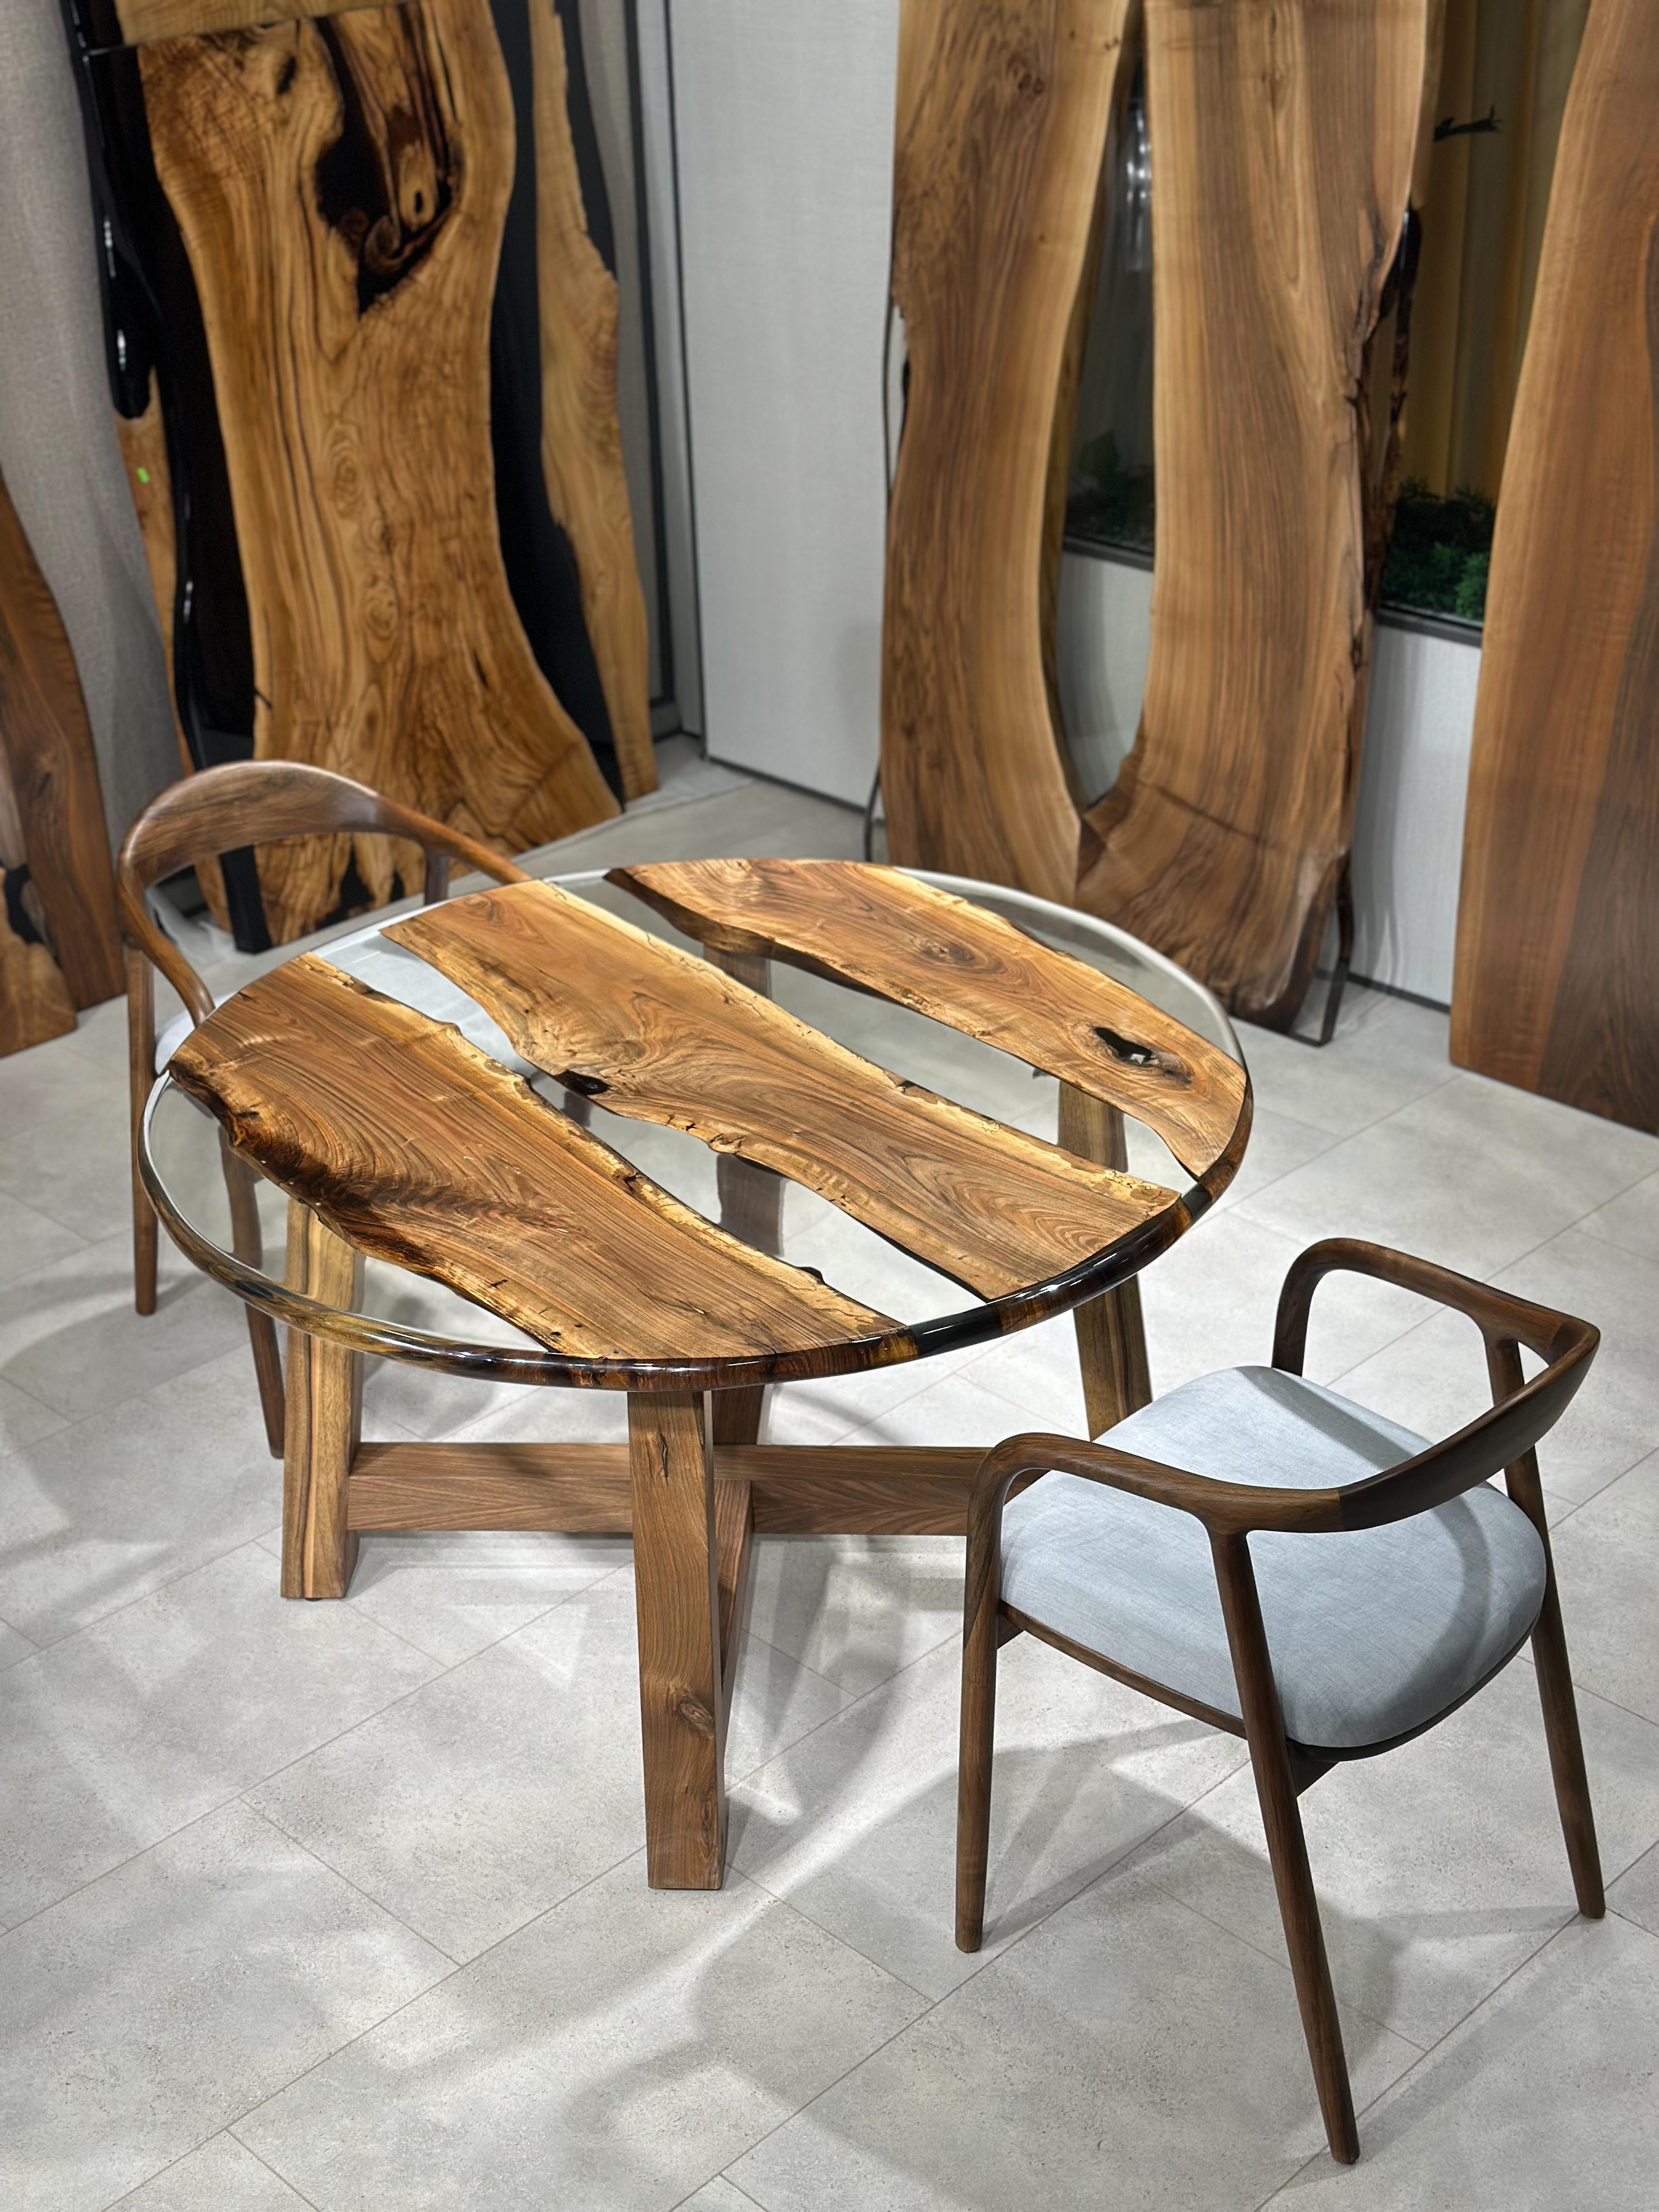 Turkish Wooden Clear Transparent Round Resin Table For Sale